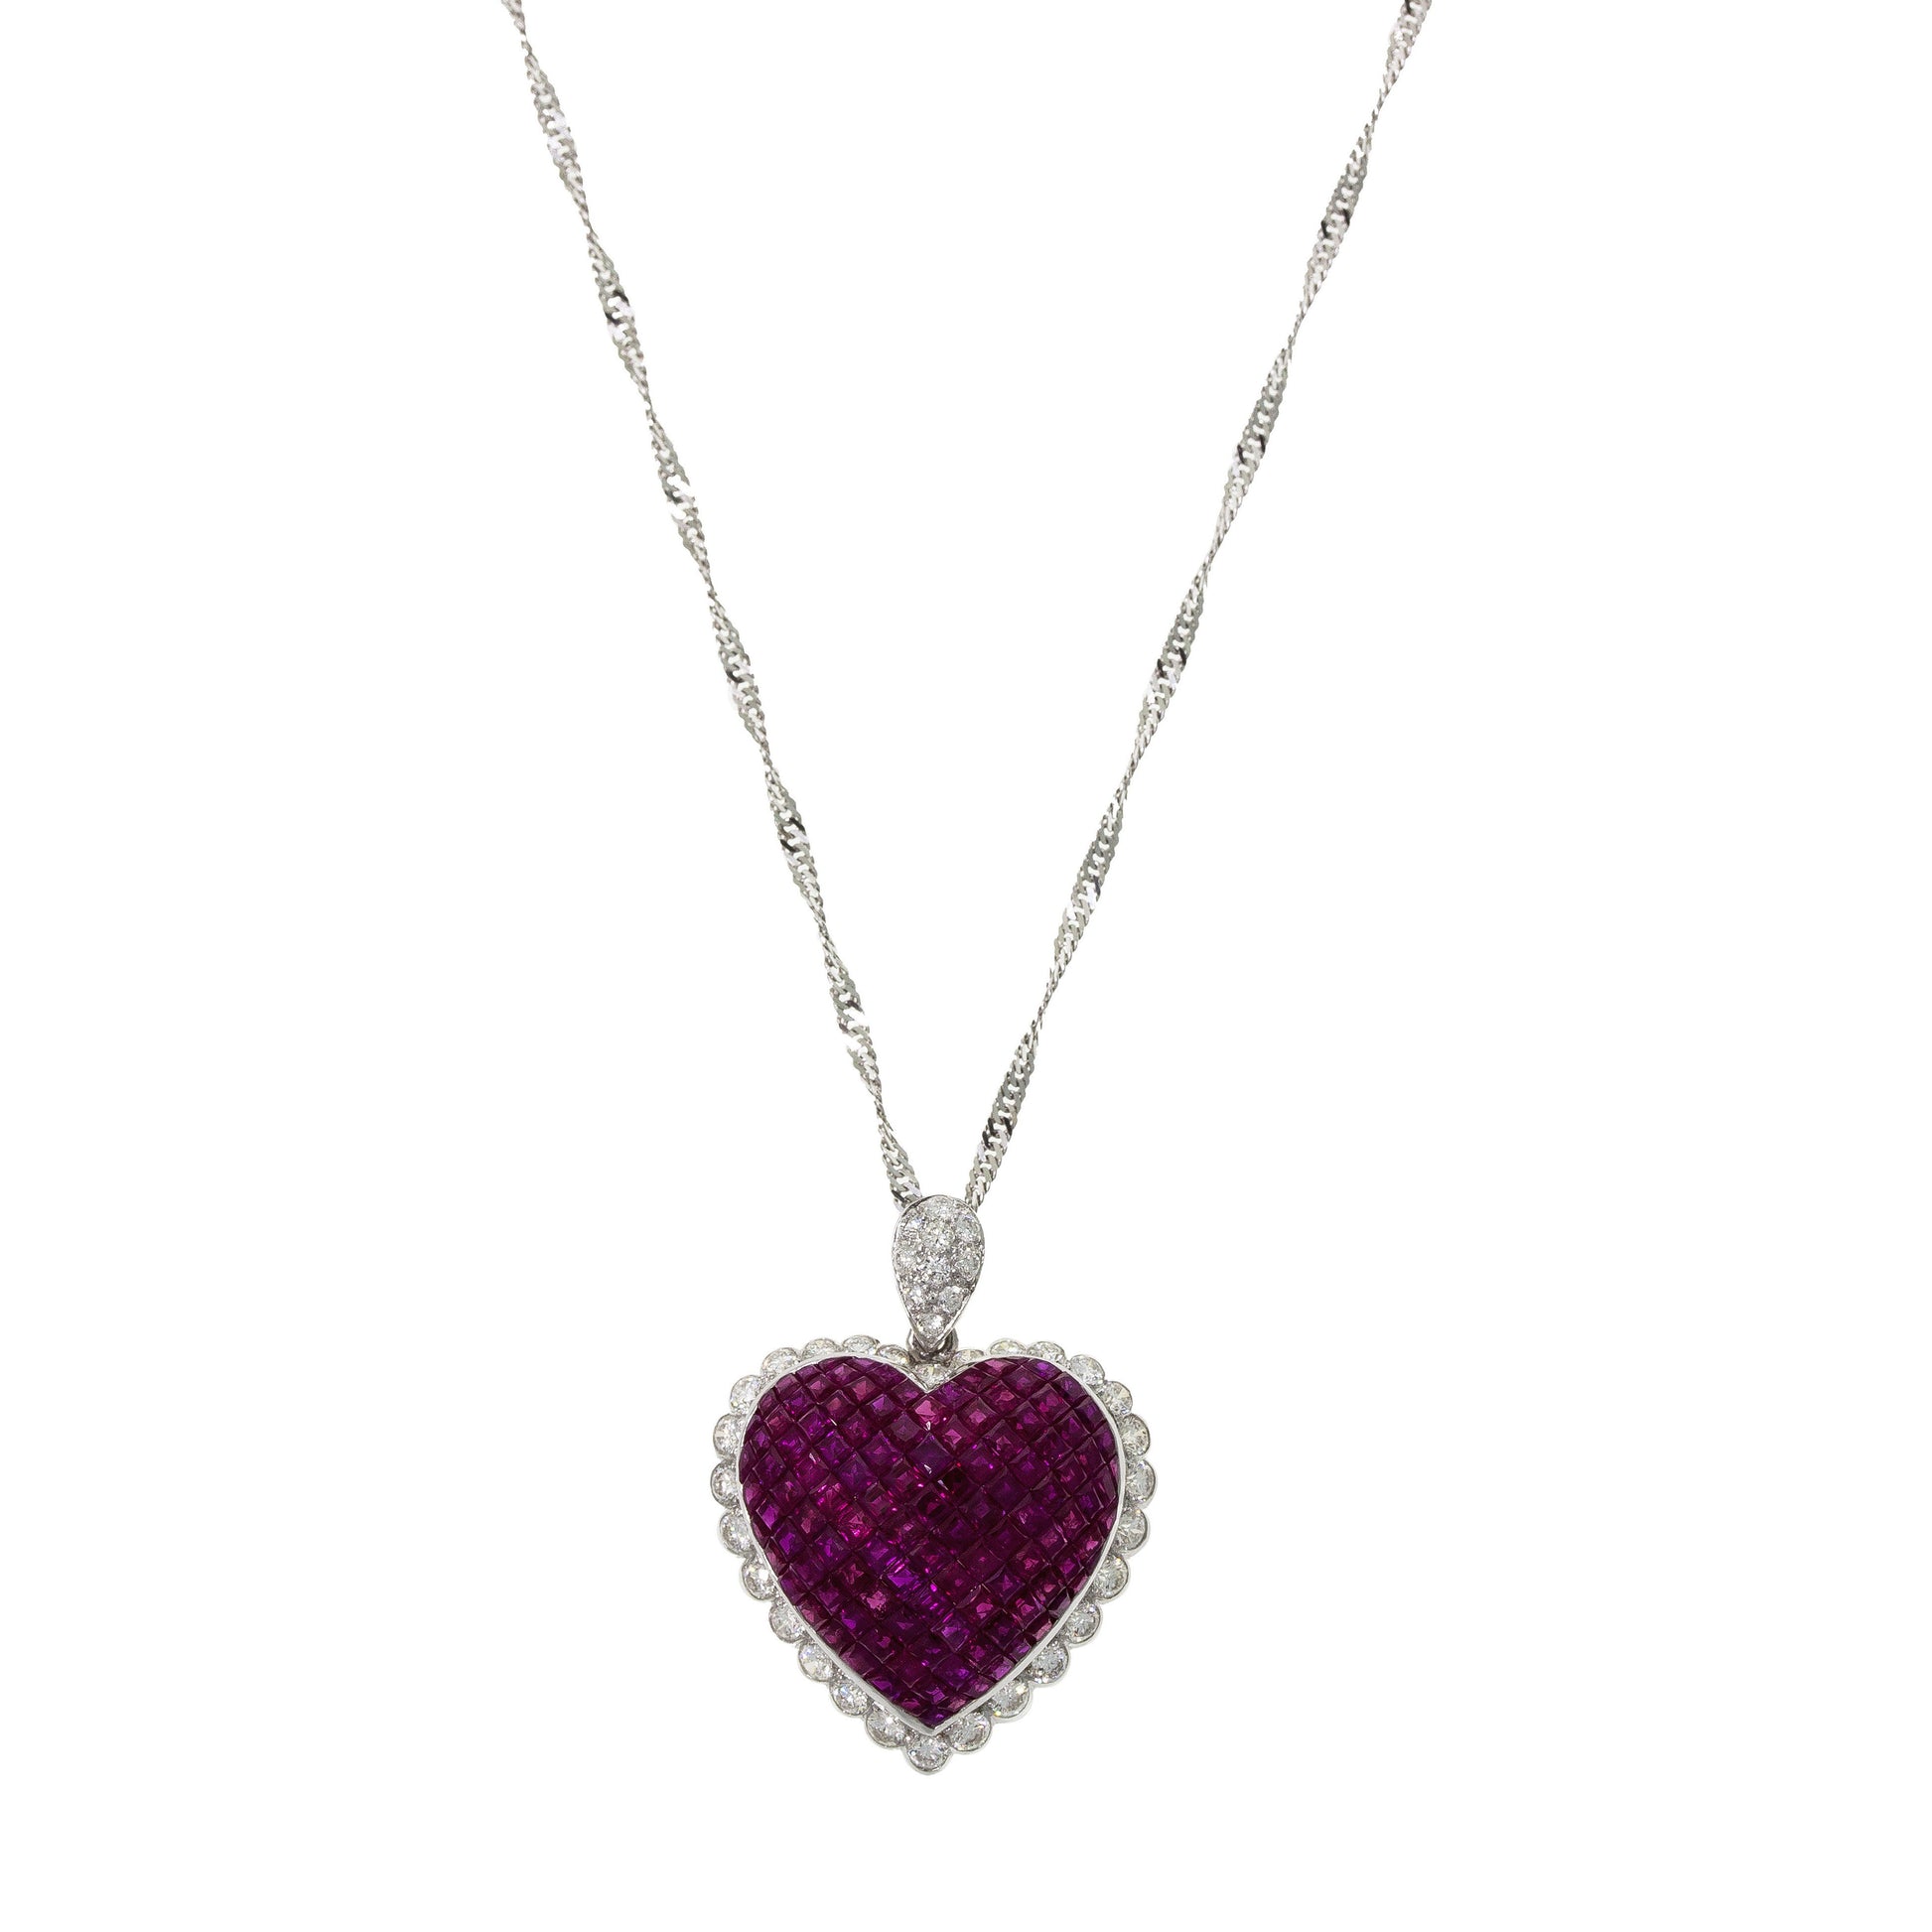  Heart  Necklace